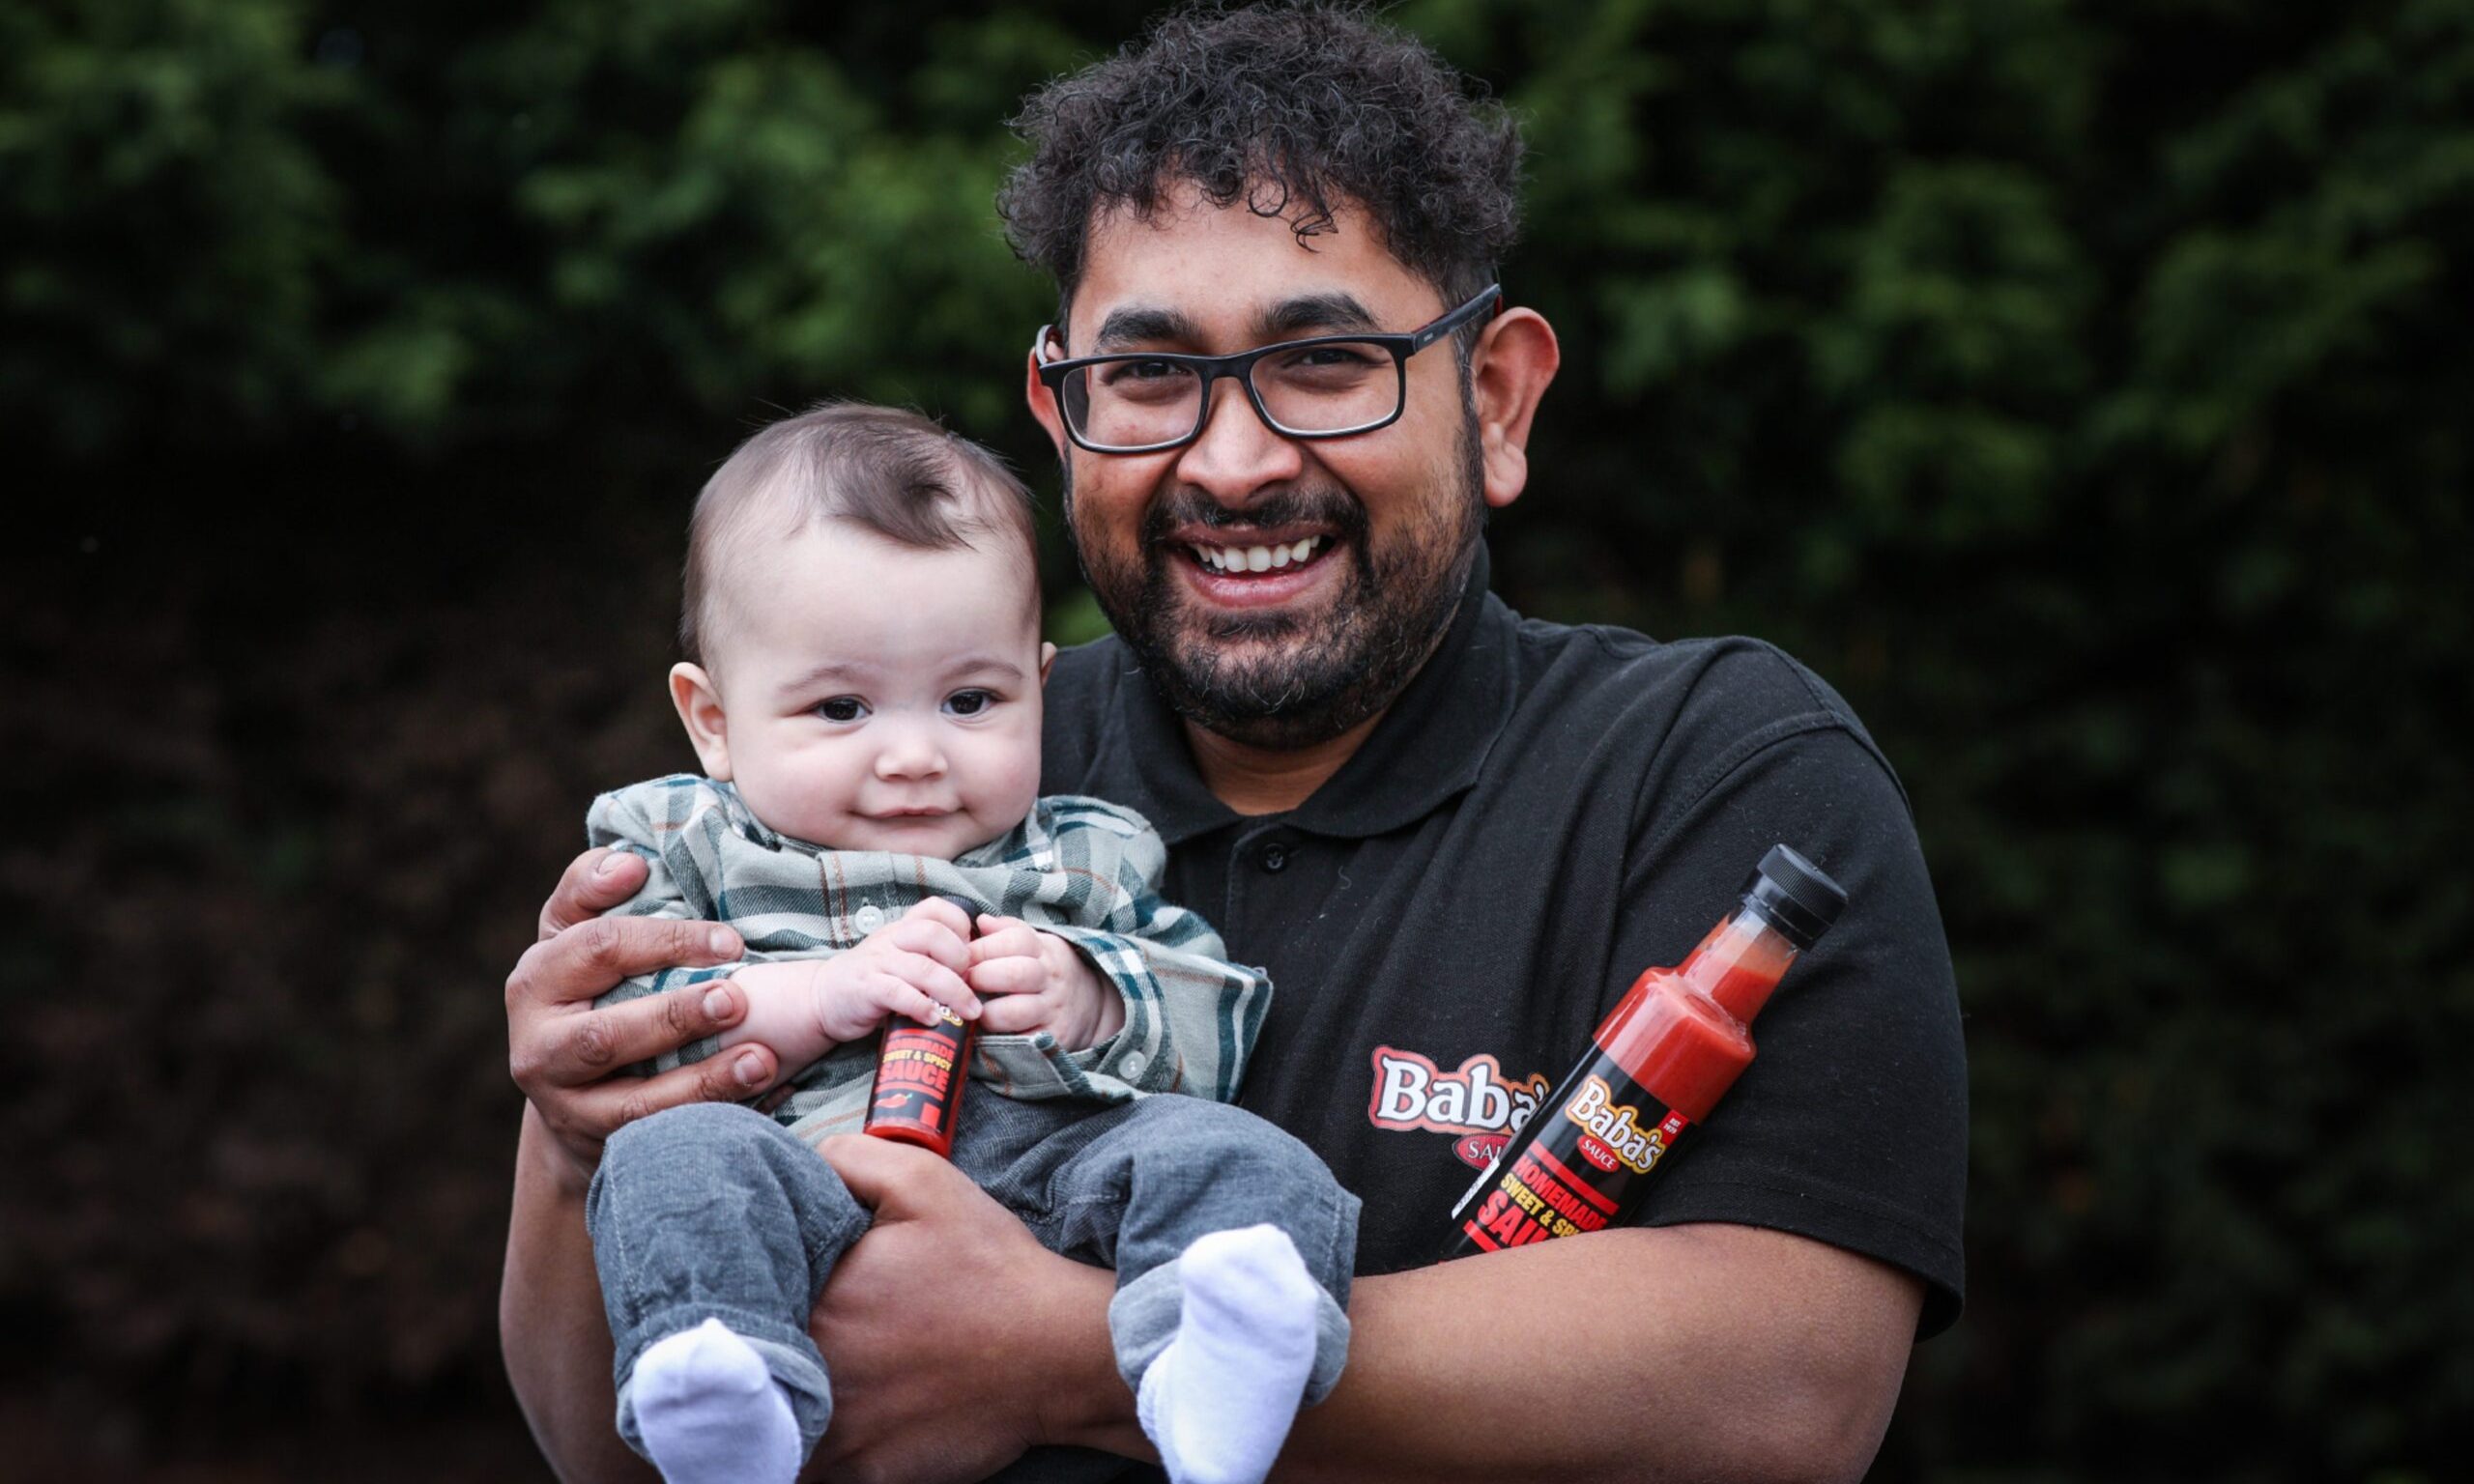 Sunny Mollah, owner of Baba's Sauce at their factory in Longforgan. Image: Mhairi Edwards/DC Thomson